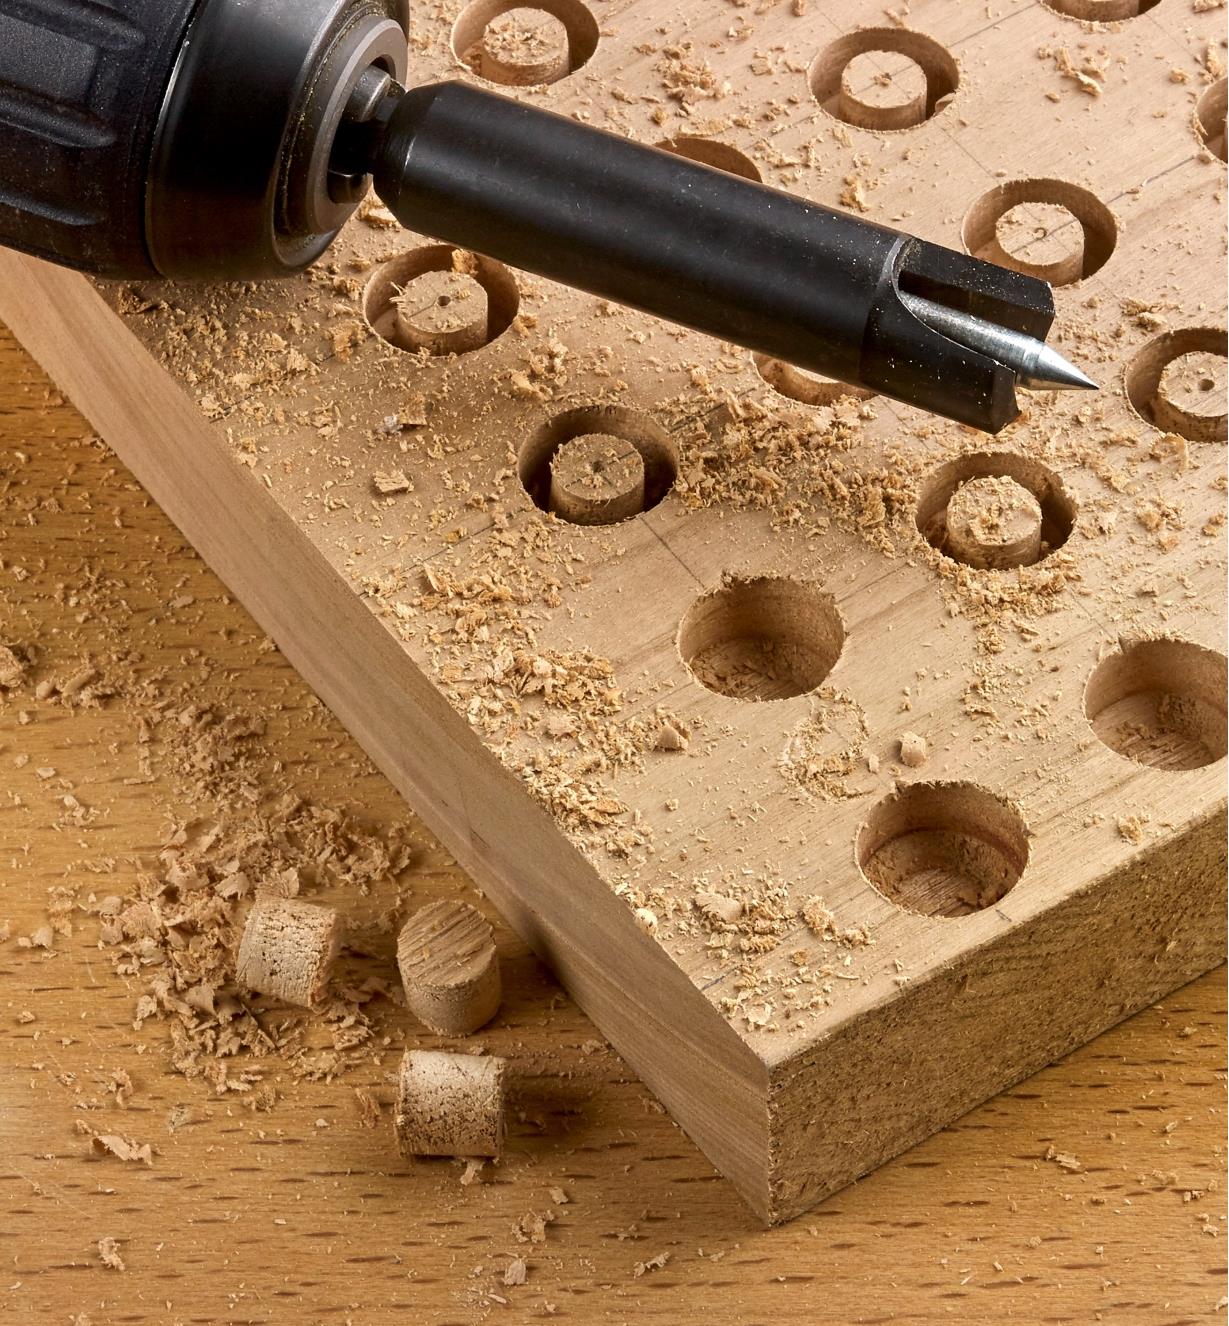 One of the self-centering plug cutters chucked in a drill, used to cut several wooden plugs